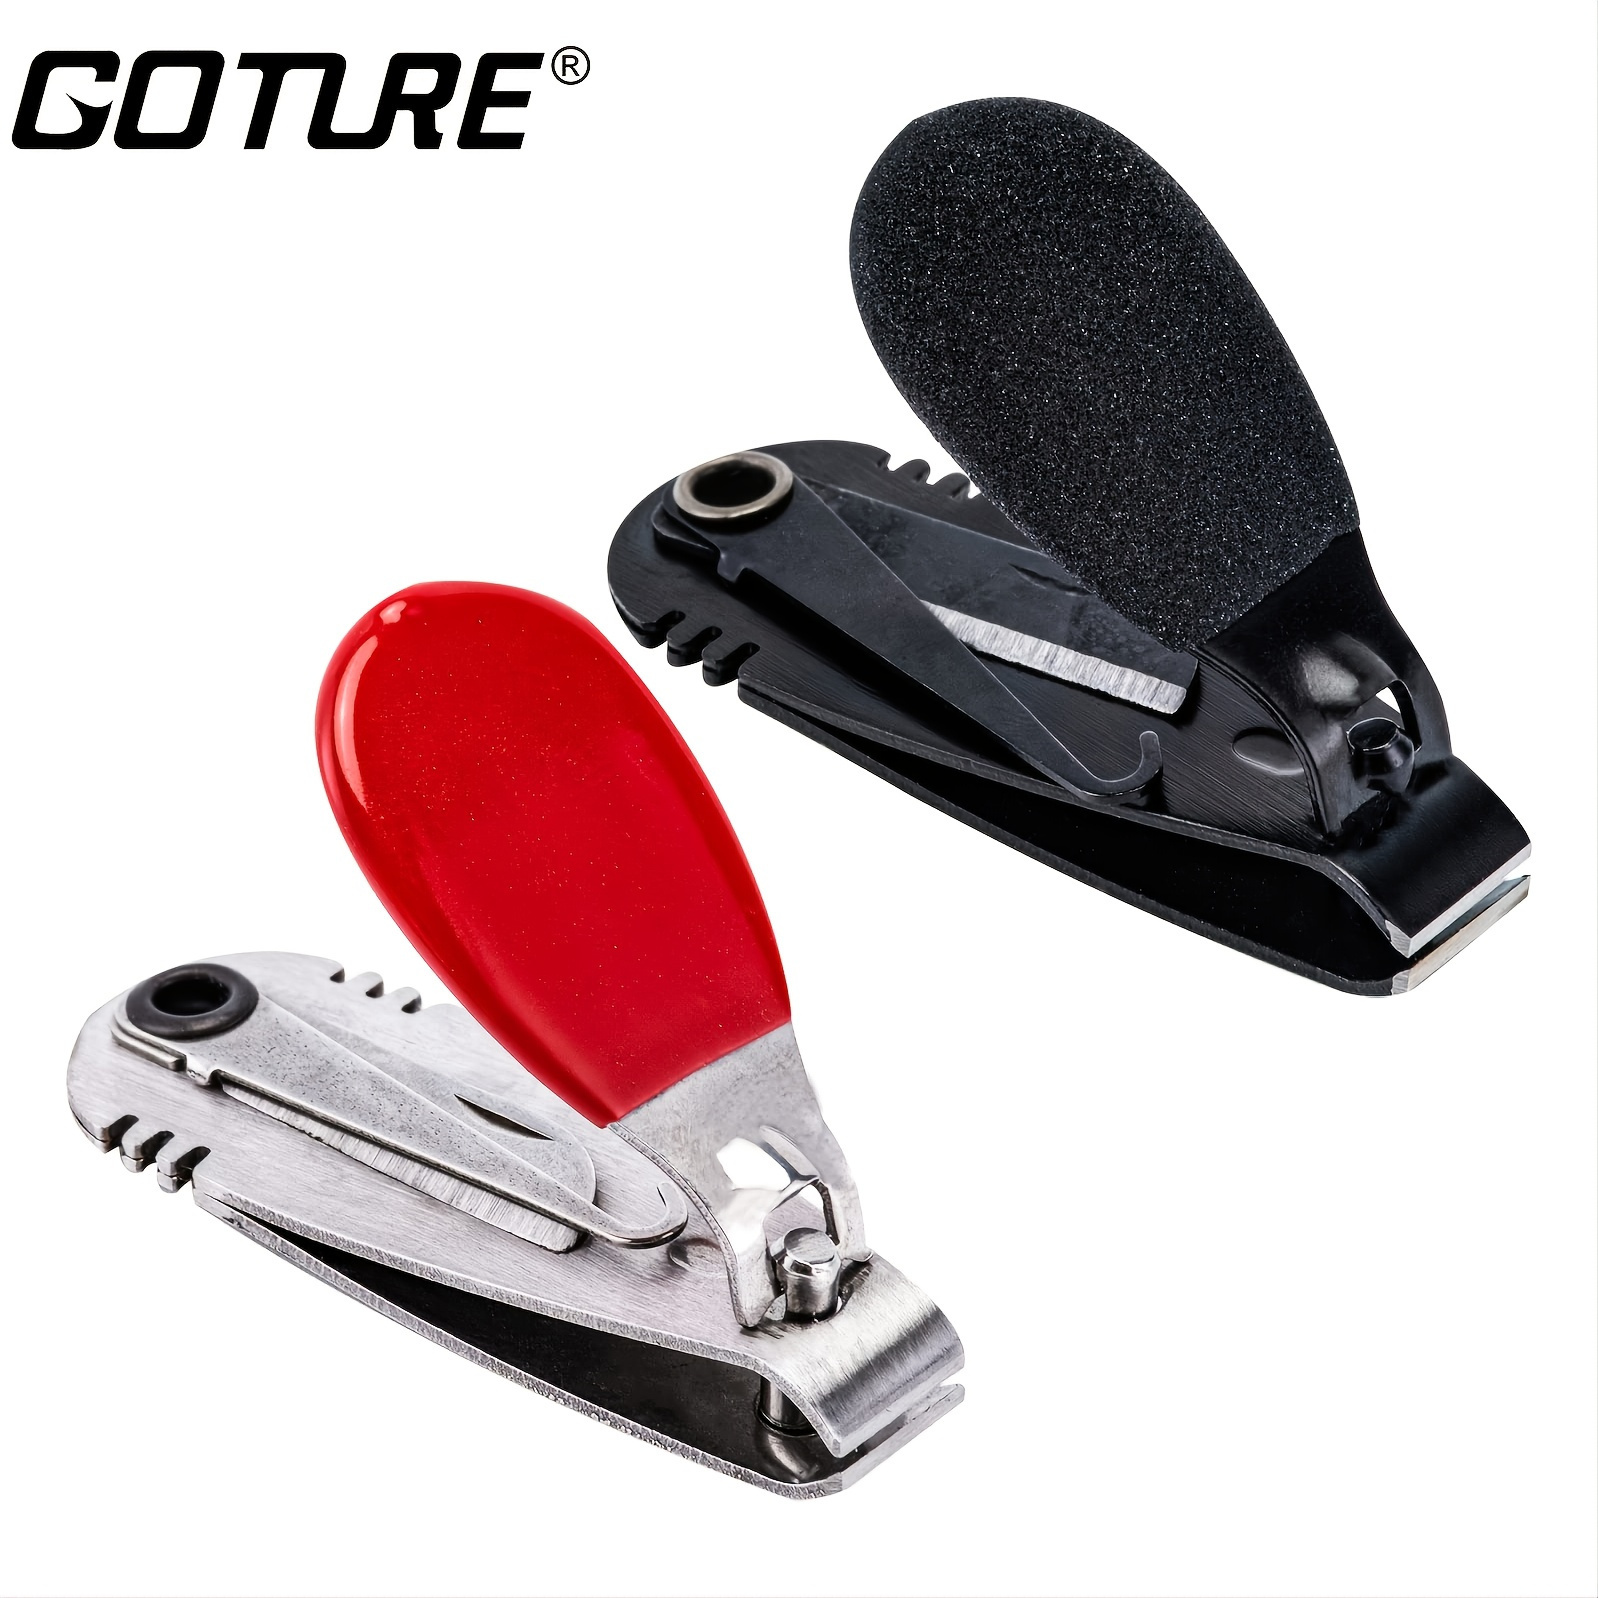 Stainless Steel Fishing Line Cutter